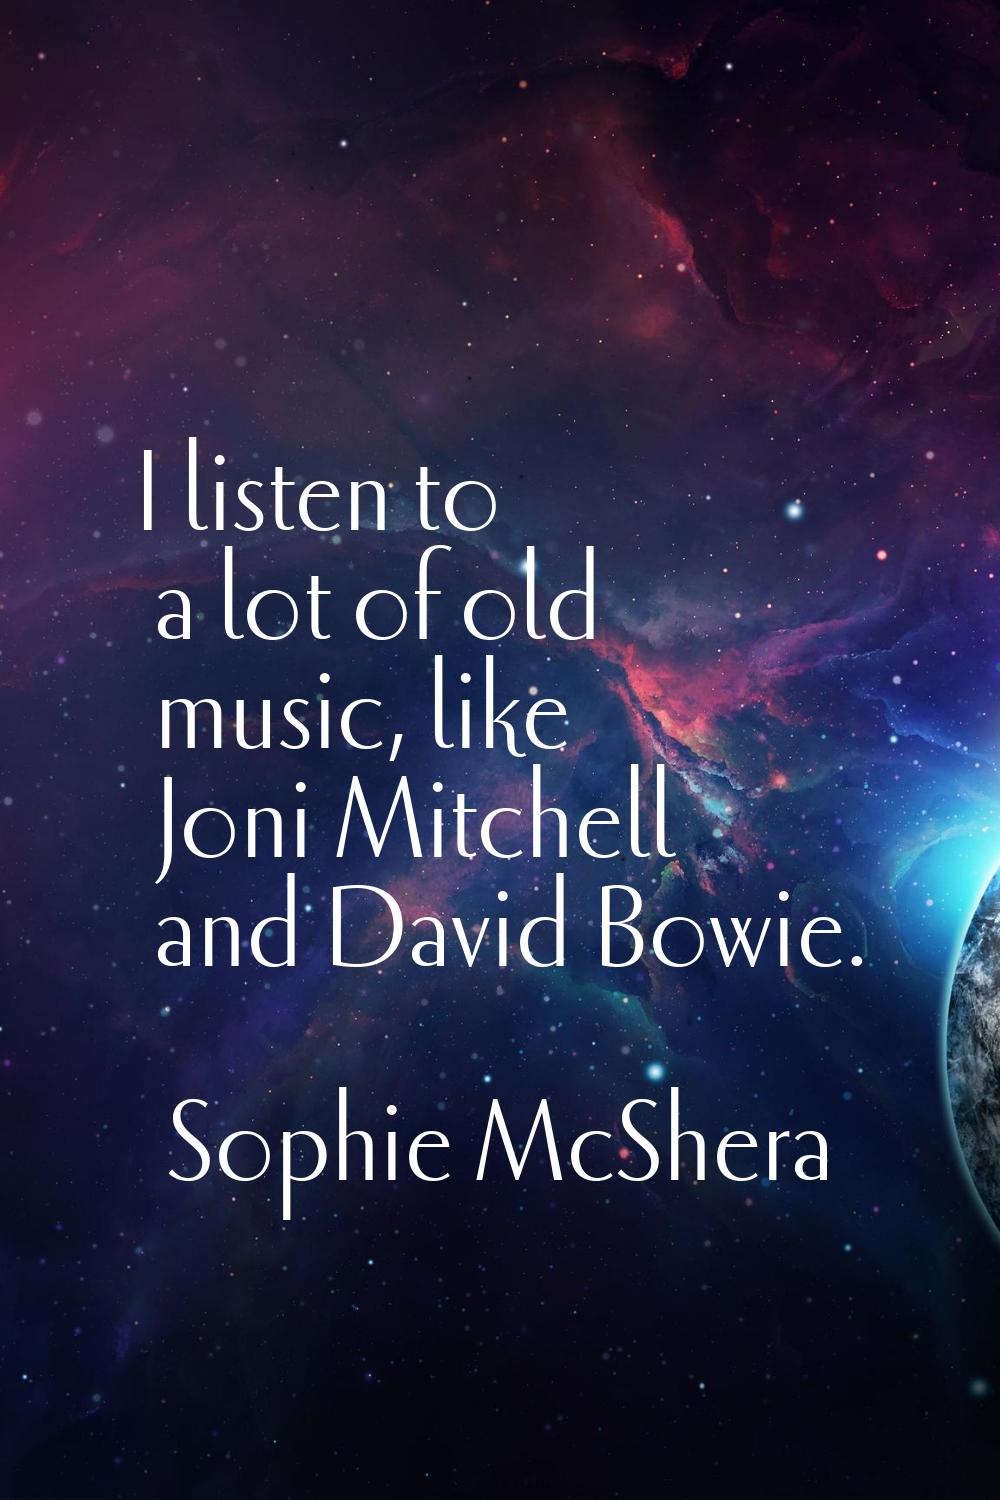 I listen to a lot of old music, like Joni Mitchell and David Bowie.